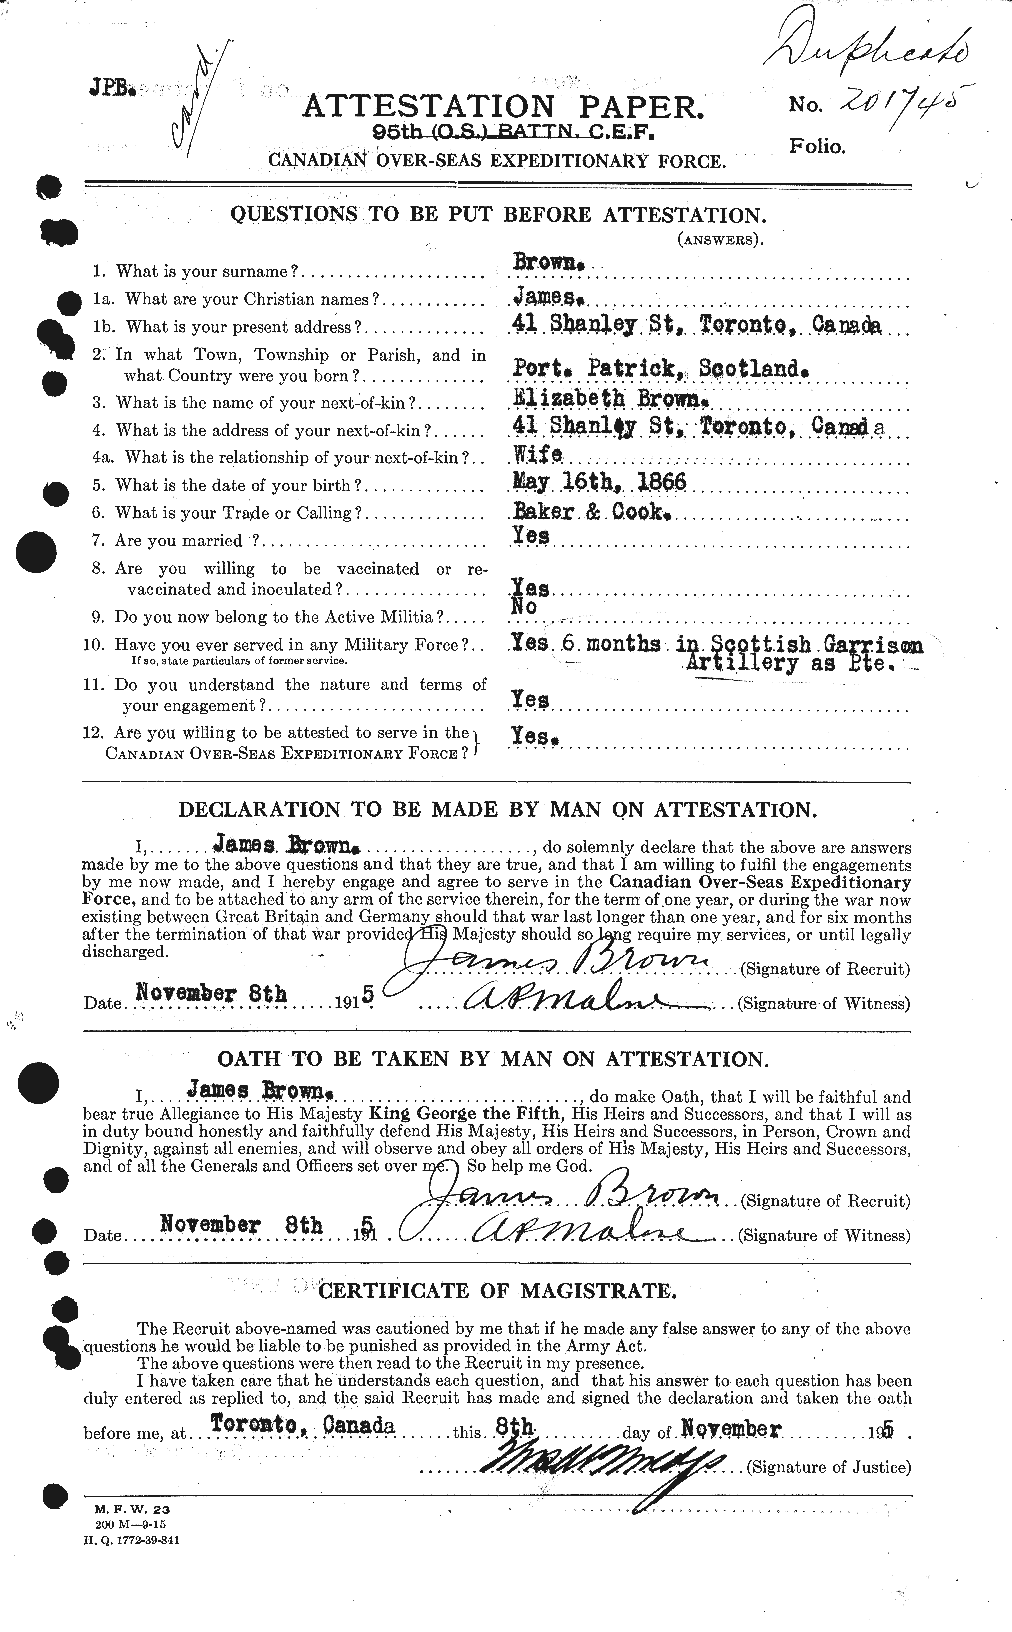 Personnel Records of the First World War - CEF 265696a